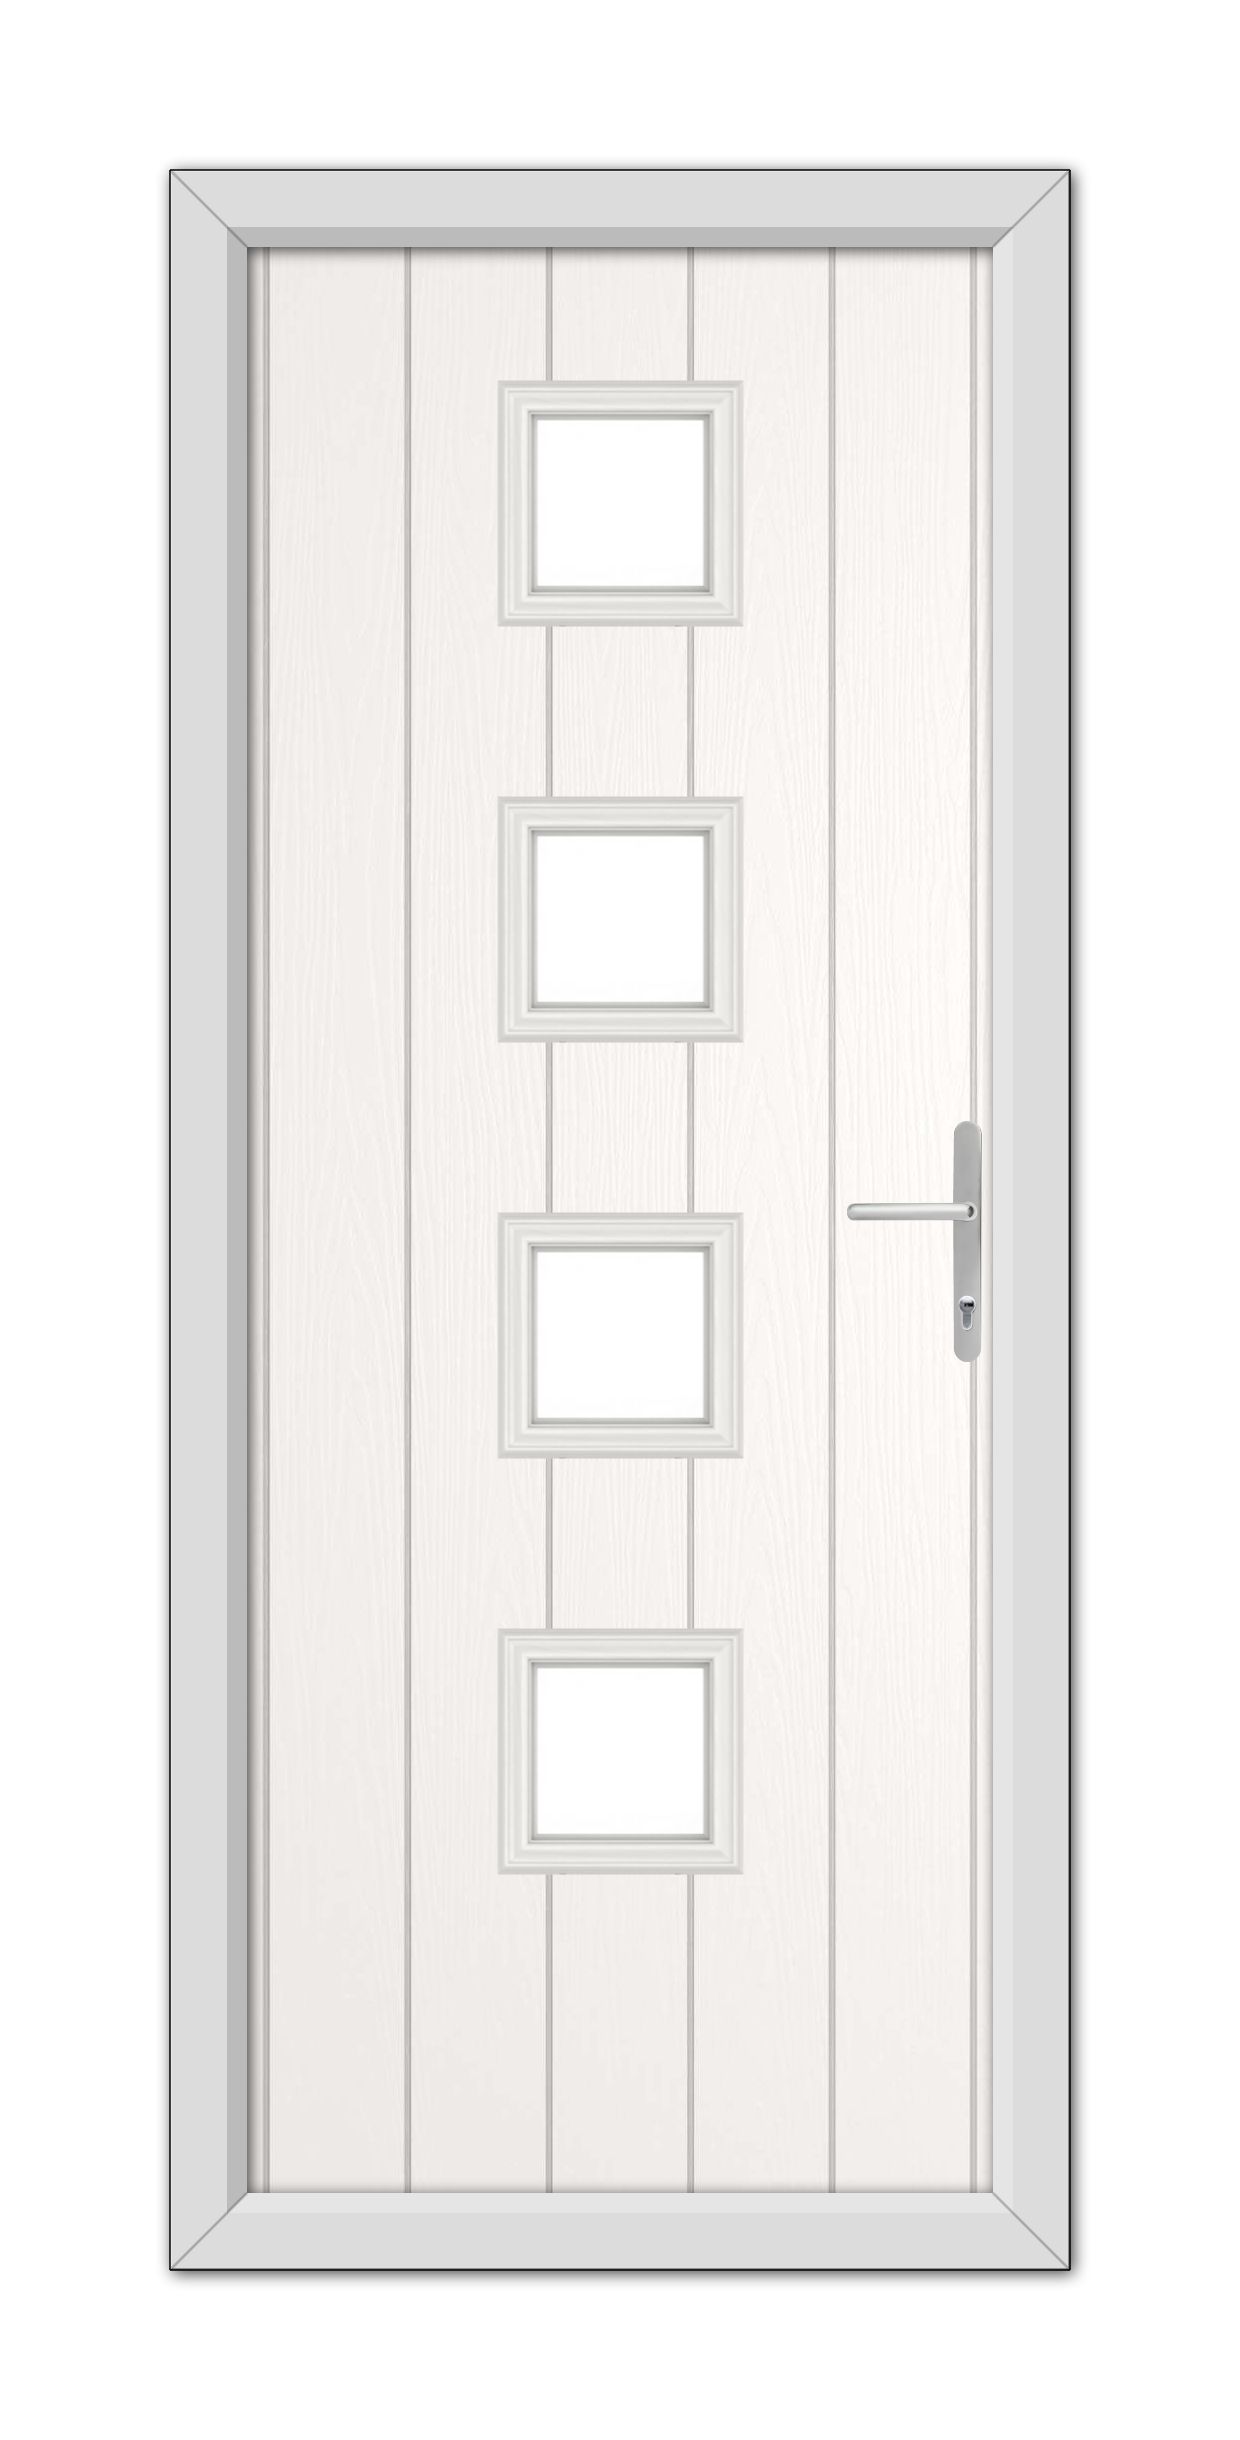 A modern White Hamilton Composite Door 48mm Timber Core with four rectangular glass panels and a silver handle, set within a gray frame.